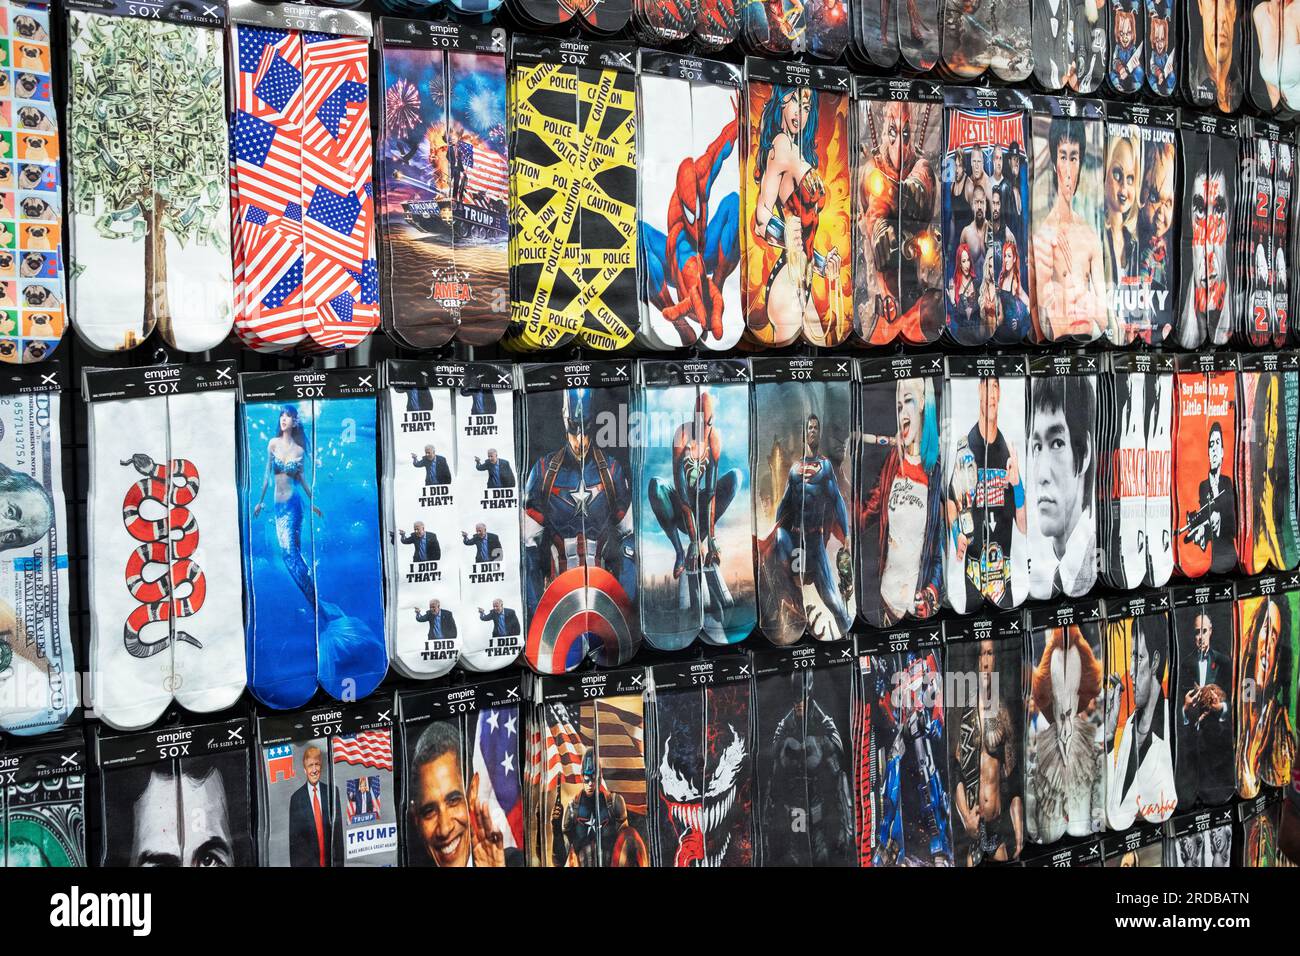 Wildly colorful socks with pop culture themes for sale at Empire Sox in the Danbury Fair Mall in Connecticut. Stock Photo